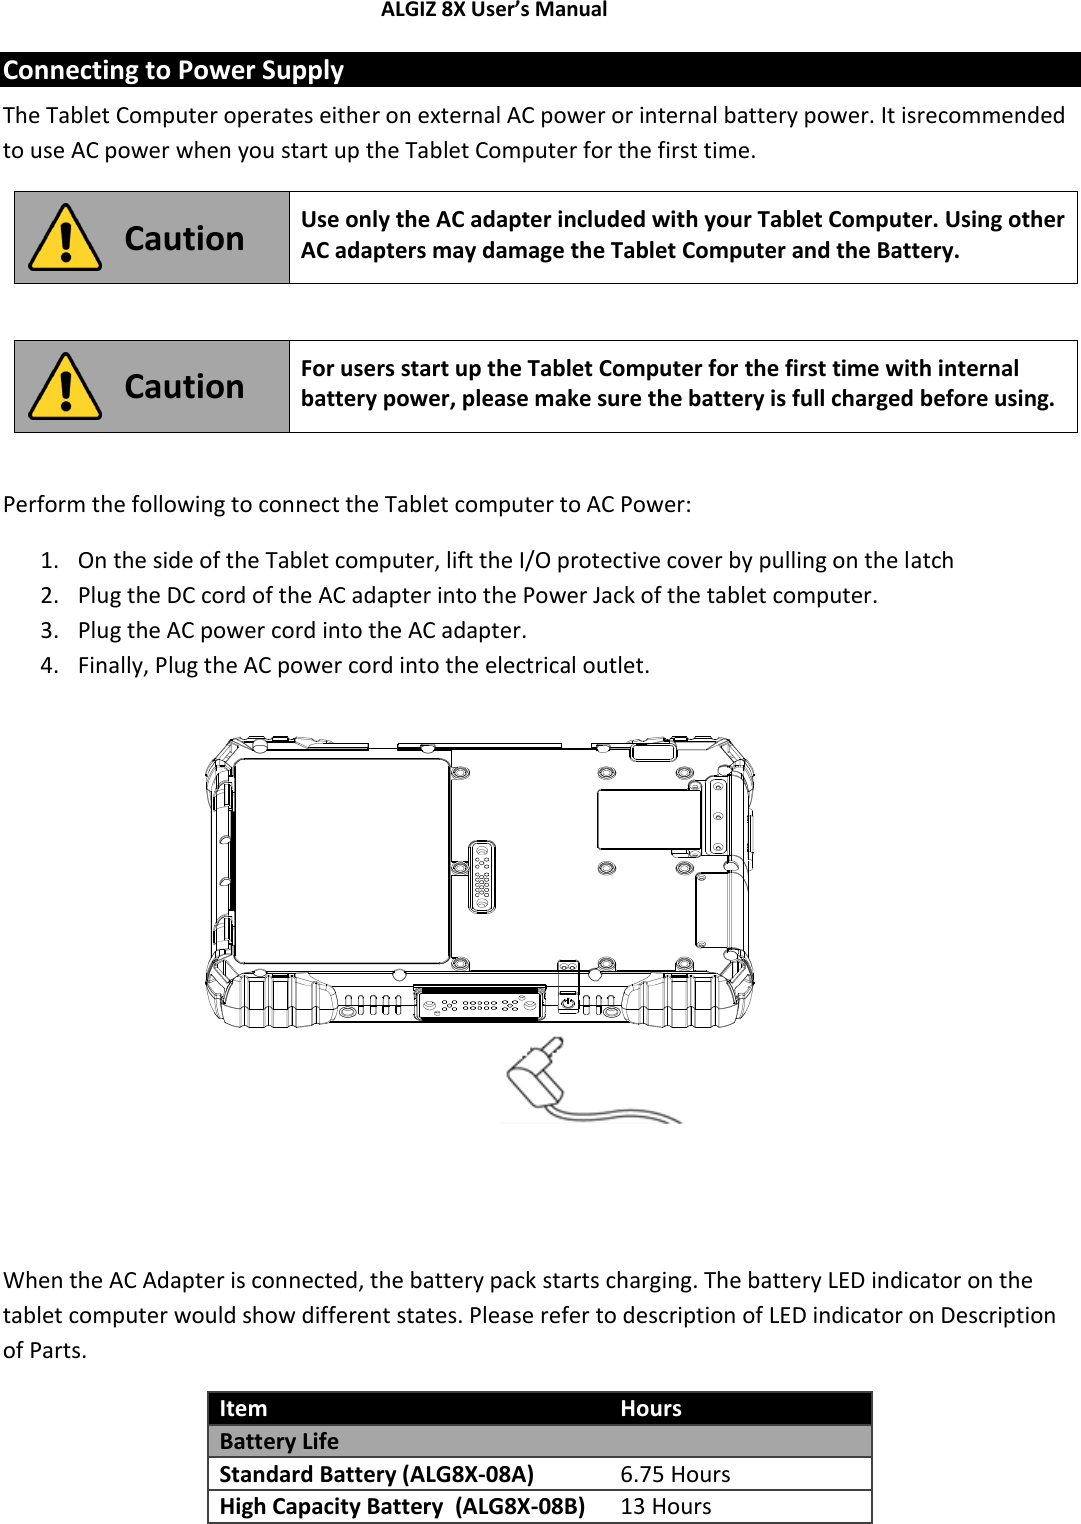 ALGIZ 8X User’s Manual        Connecting to Power Supply The Tablet Computer operates either on external AC power or internal battery power. It isrecommended to use AC power when you start up the Tablet Computer for the first time.   Caution Use only the AC adapter included with your Tablet Computer. Using other AC adapters may damage the Tablet Computer and the Battery.   Caution For users start up the Tablet Computer for the first time with internal battery power, please make sure the battery is full charged before using.  Perform the following to connect the Tablet computer to AC Power: 1. On the side of the Tablet computer, lift the I/O protective cover by pulling on the latch 2. Plug the DC cord of the AC adapter into the Power Jack of the tablet computer. 3. Plug the AC power cord into the AC adapter. 4. Finally, Plug the AC power cord into the electrical outlet.           When the AC Adapter is connected, the battery pack starts charging. The battery LED indicator on the tablet computer would show different states. Please refer to description of LED indicator on Description of Parts. Item Hours Battery Life  Standard Battery (ALG8X-08A) 6.75 Hours High Capacity Battery  (ALG8X-08B) 13 Hours 